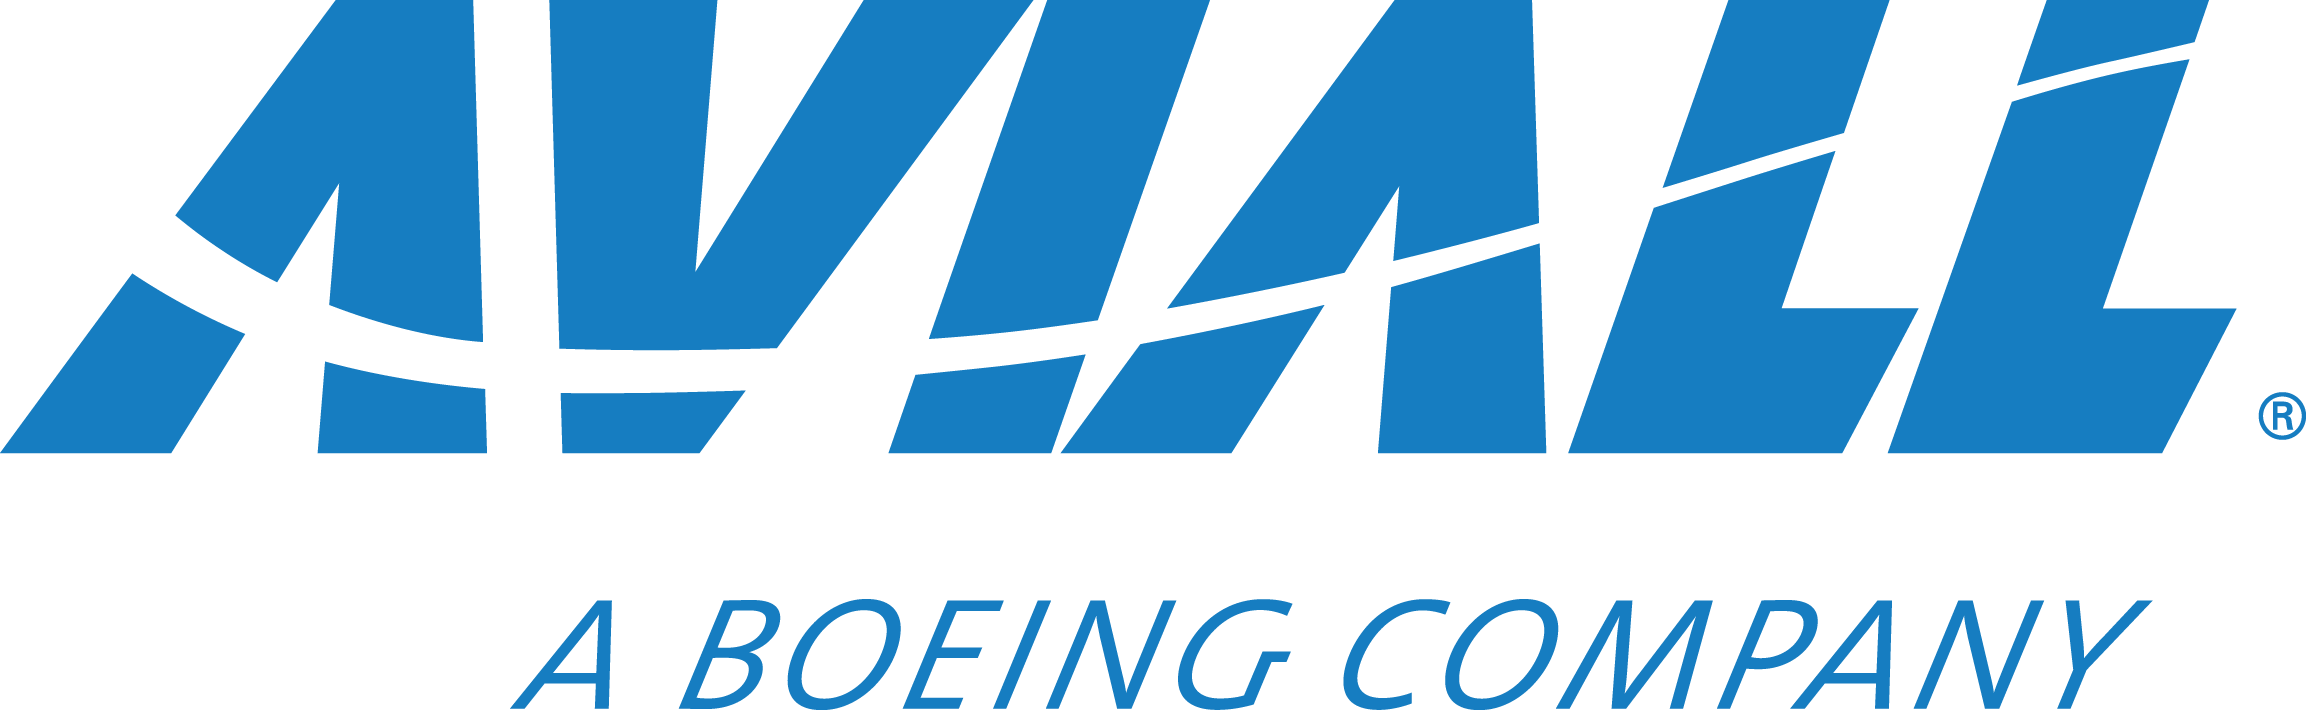 Aviall A Boeing Company Kell-Strom Tool Co. Inc. Global Distributor